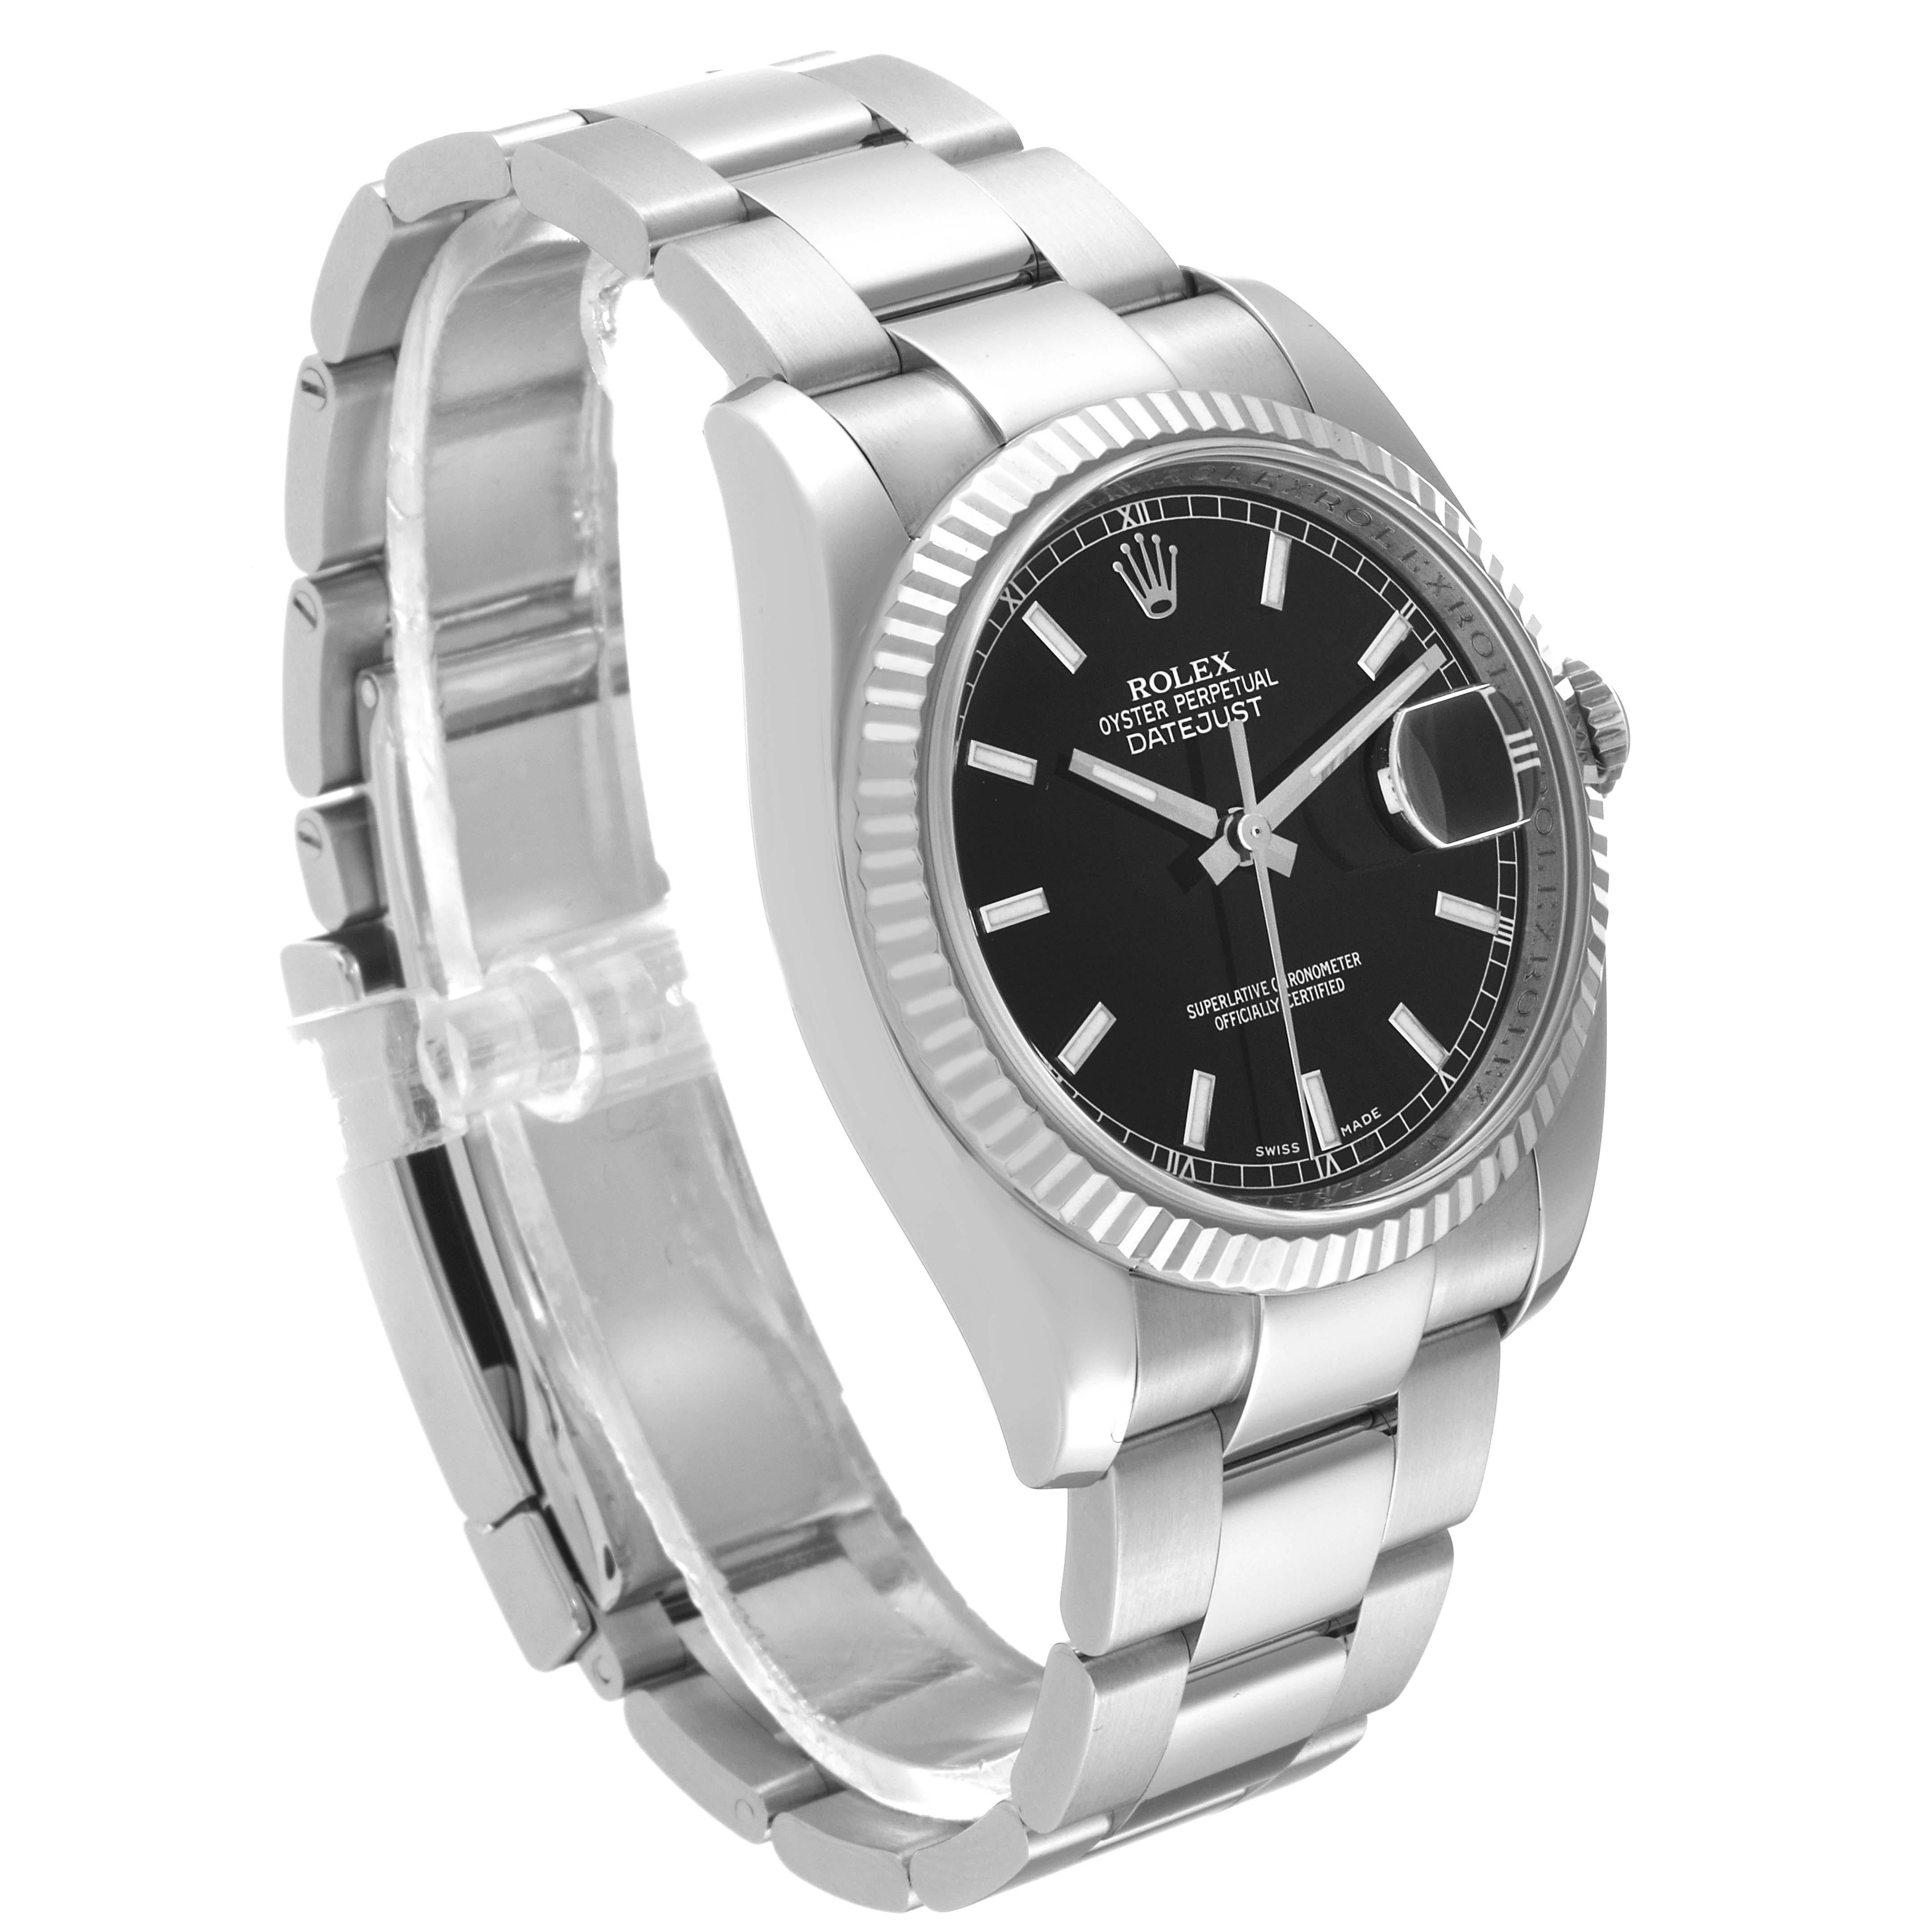 Rolex Datejust Steel White Gold Fluted Bezel Black Dial Mens Watch 116234 For Sale 2